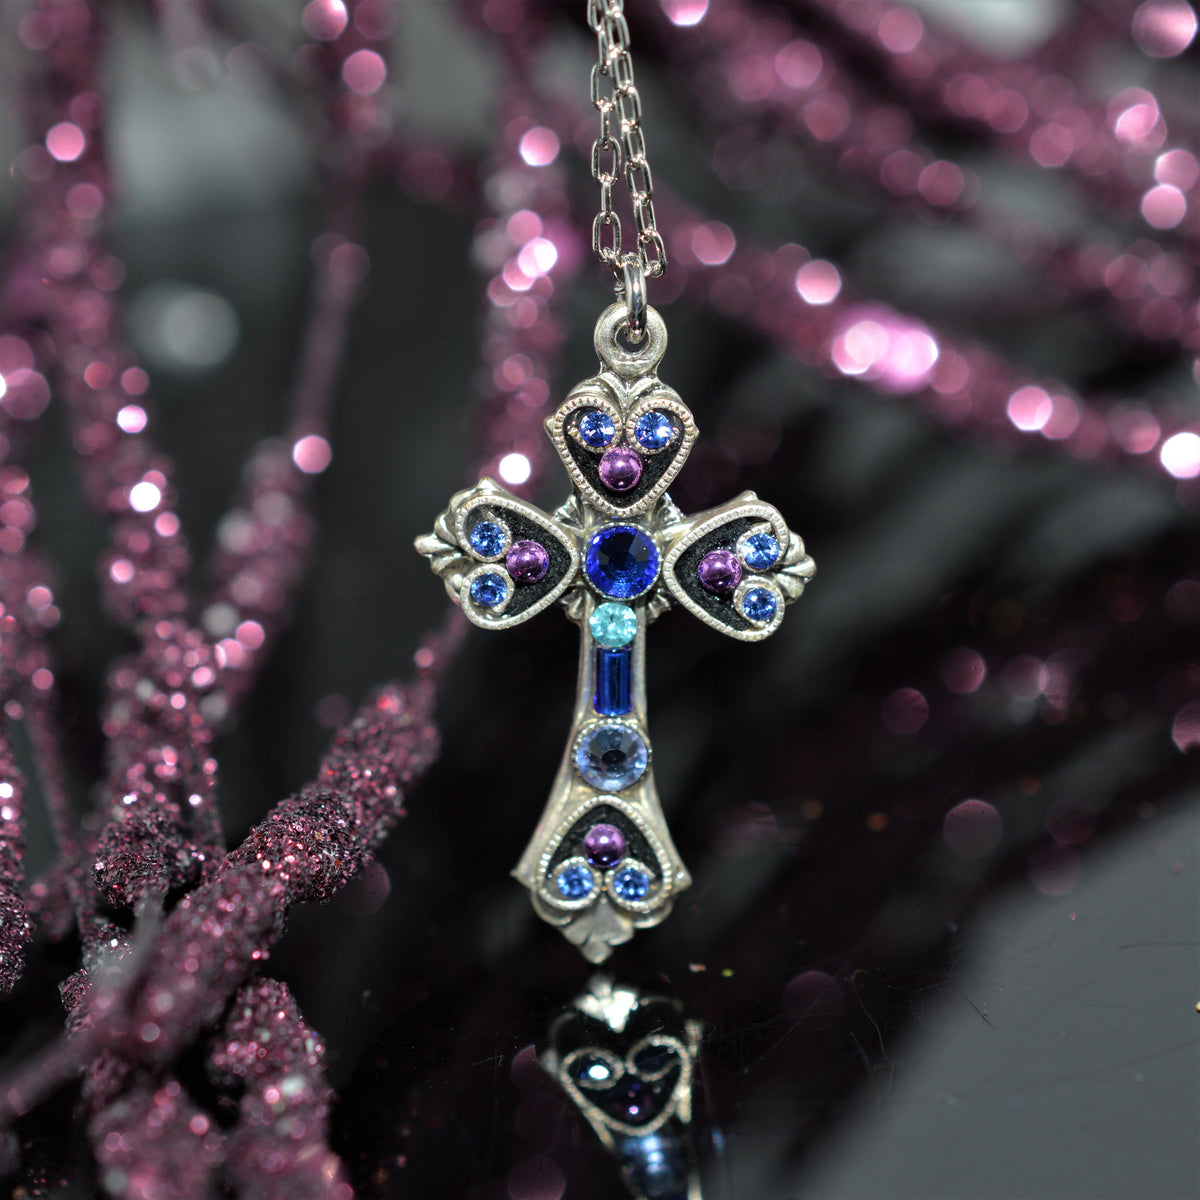 Antique Silver Plated Cross Pendant With Sapphire Colored Crystals by Firefly